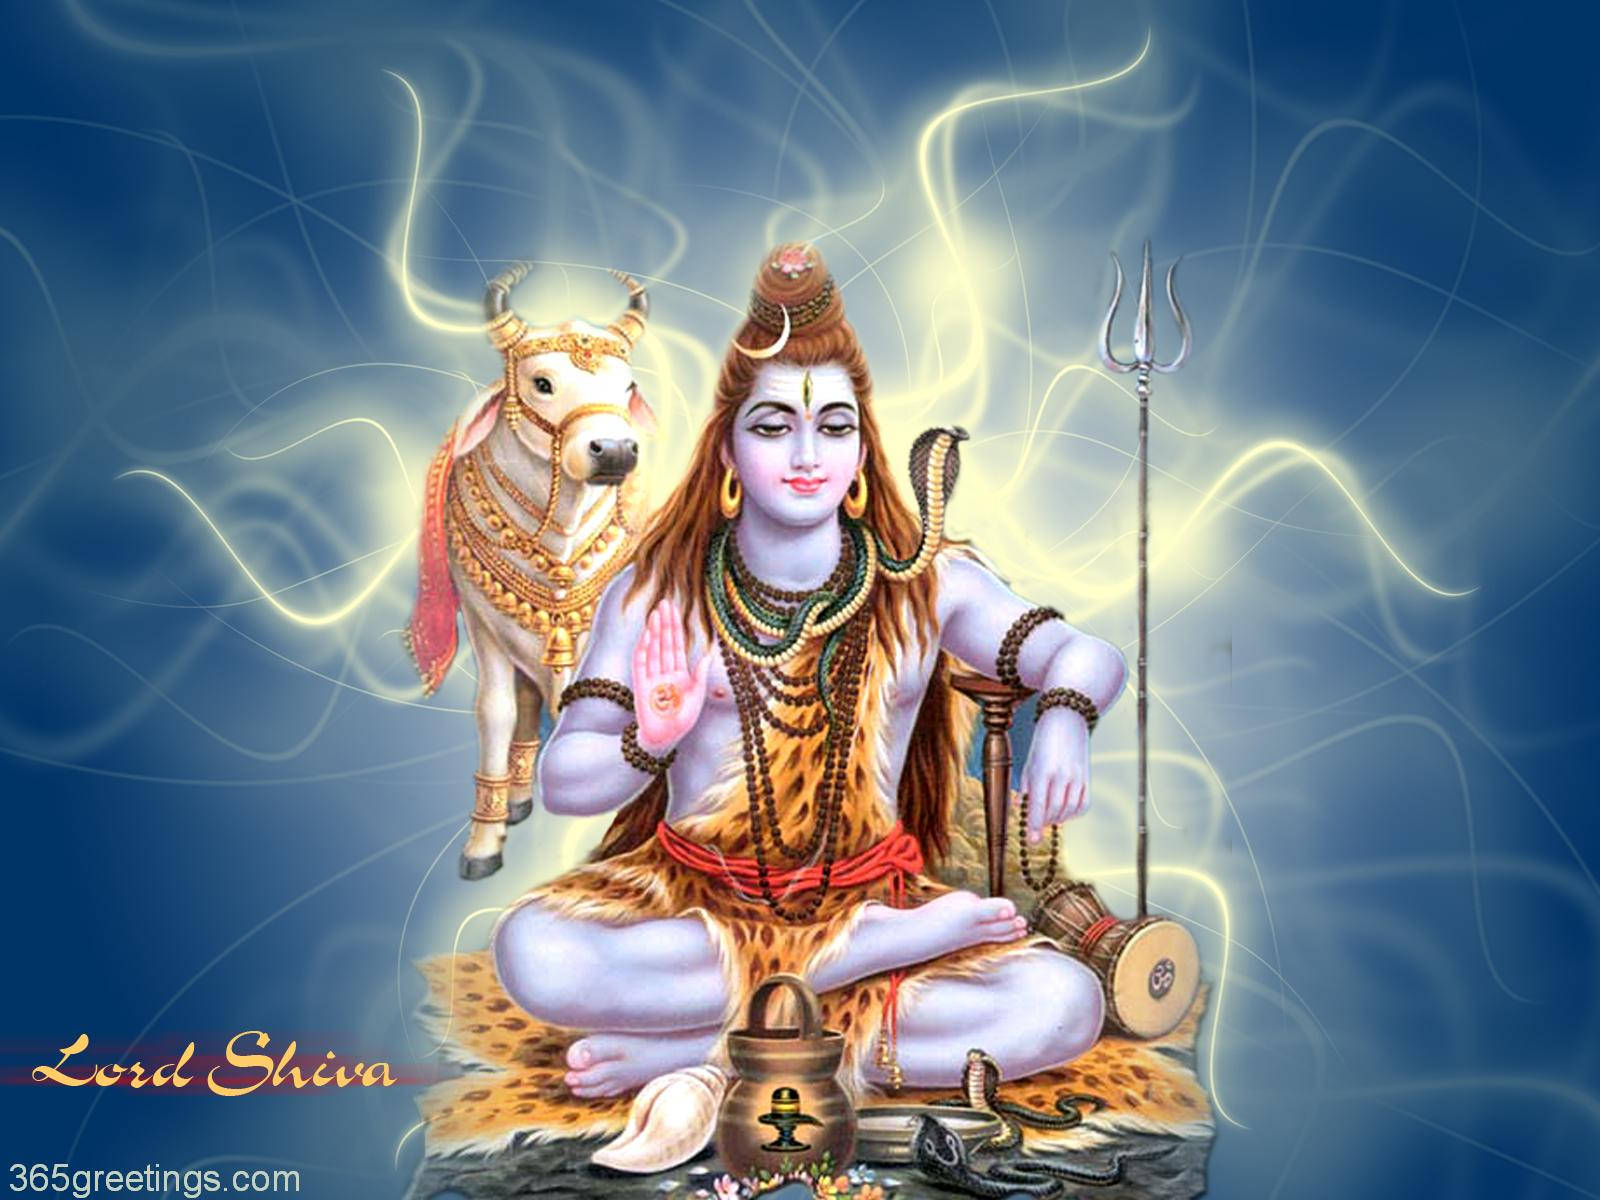 The Great Lord Shiva Background